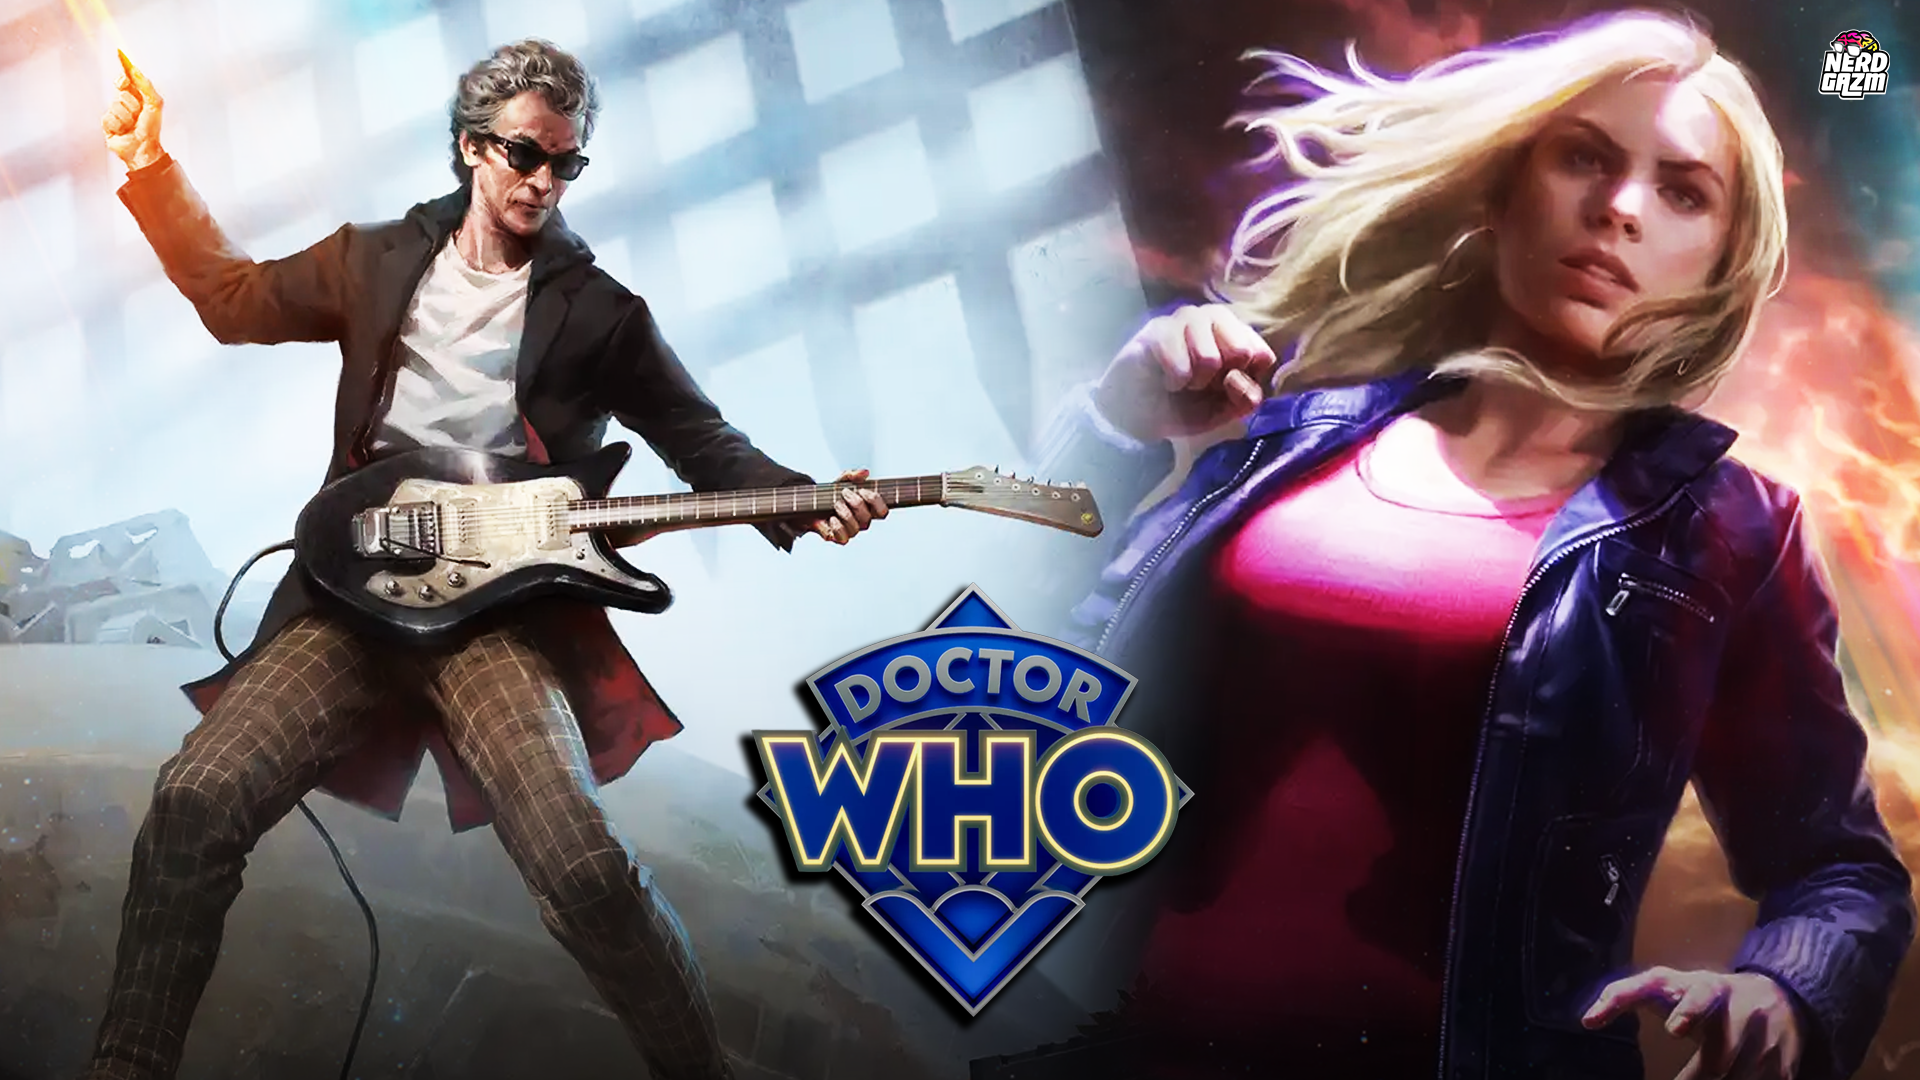 Preview Magic: The Gathering's New Doctor Who Set - Nerdgazm